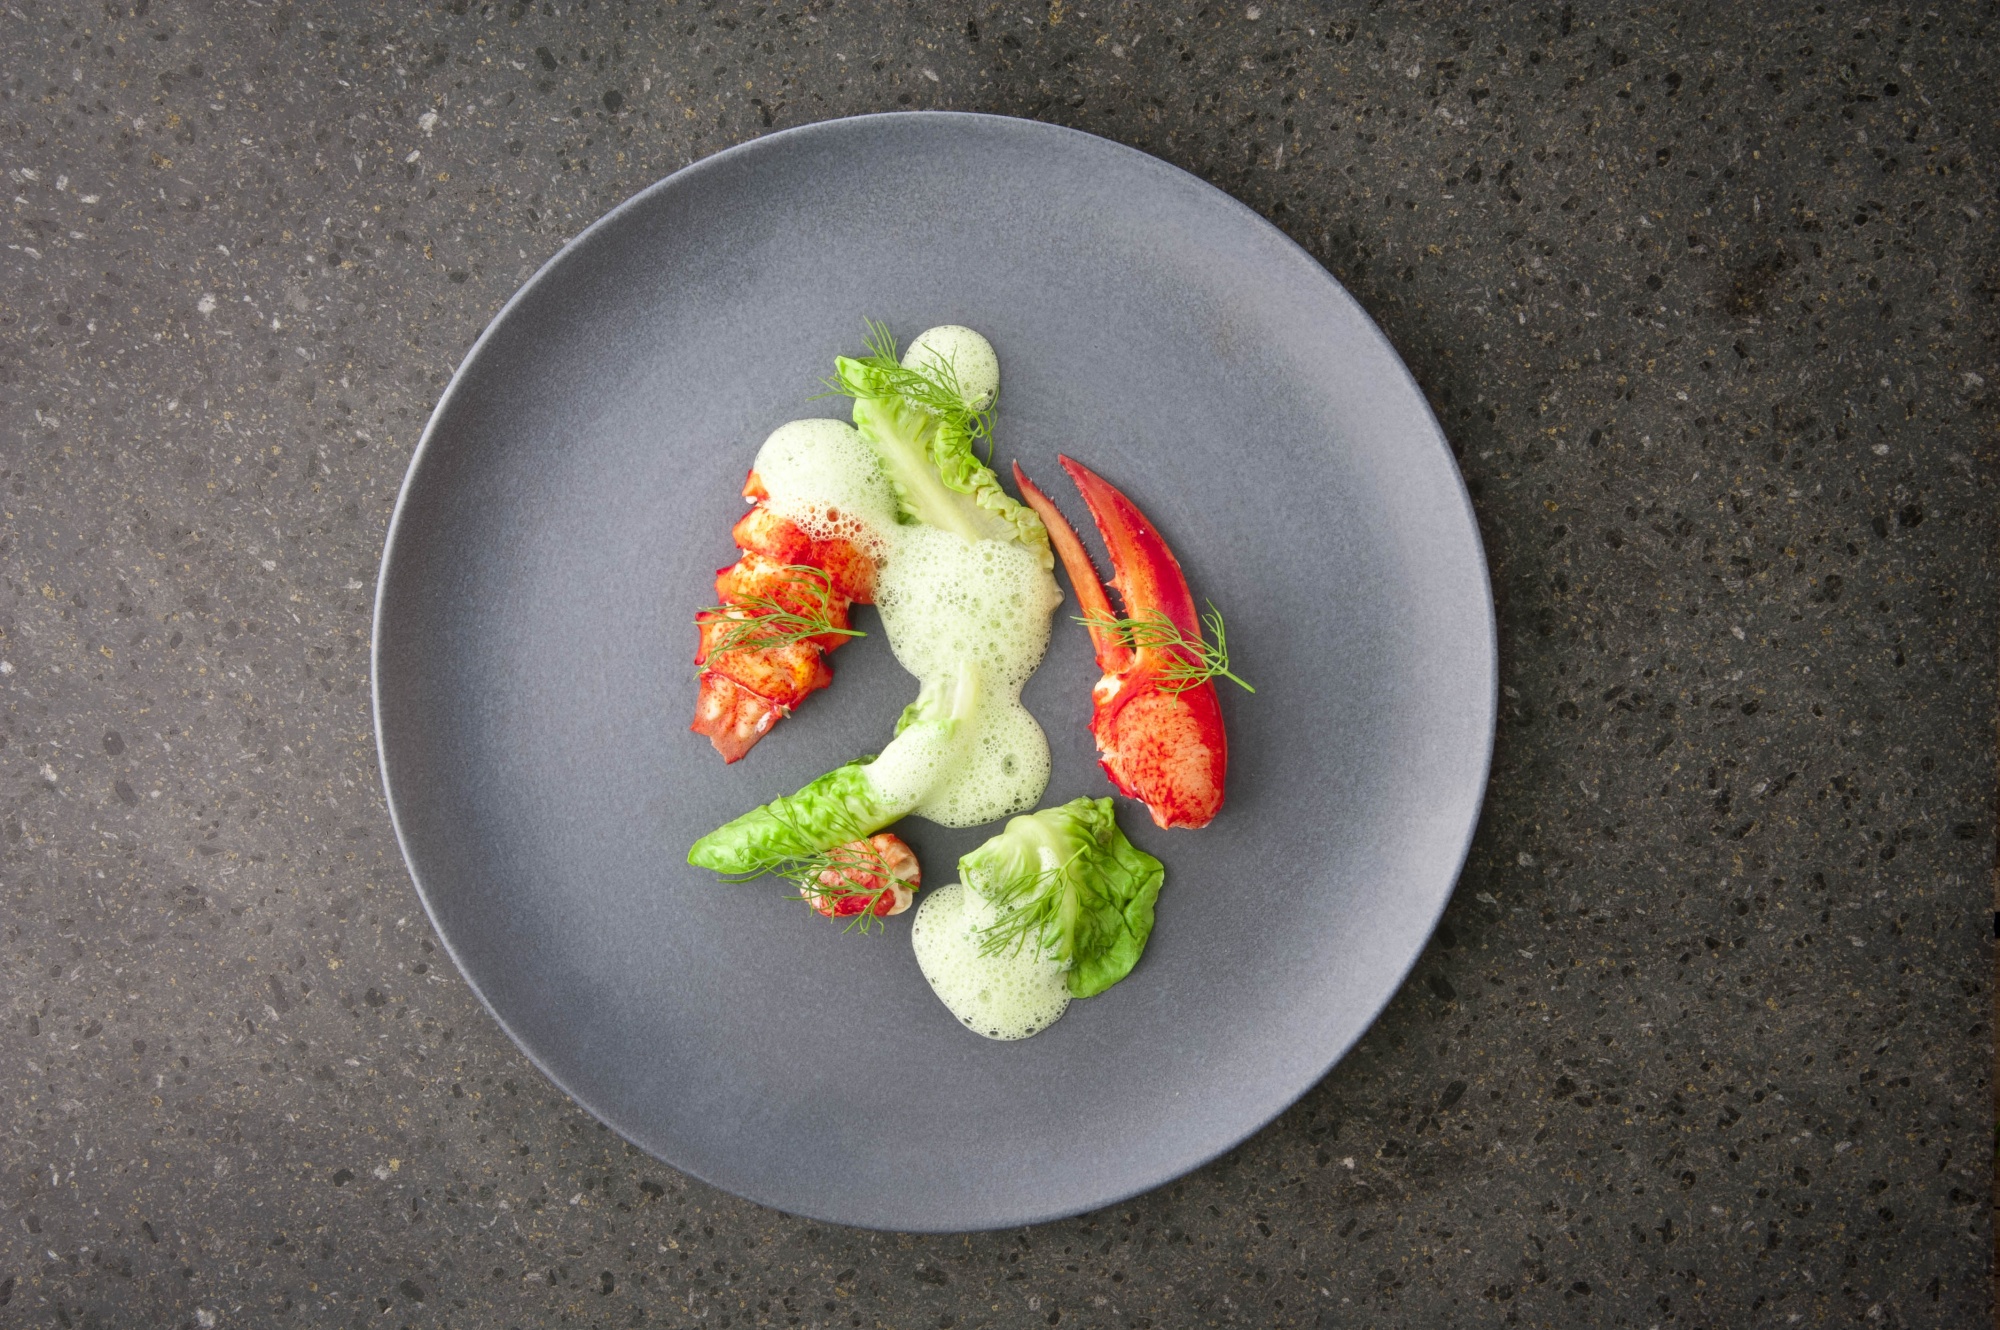 Lobster, lettuce and fennel